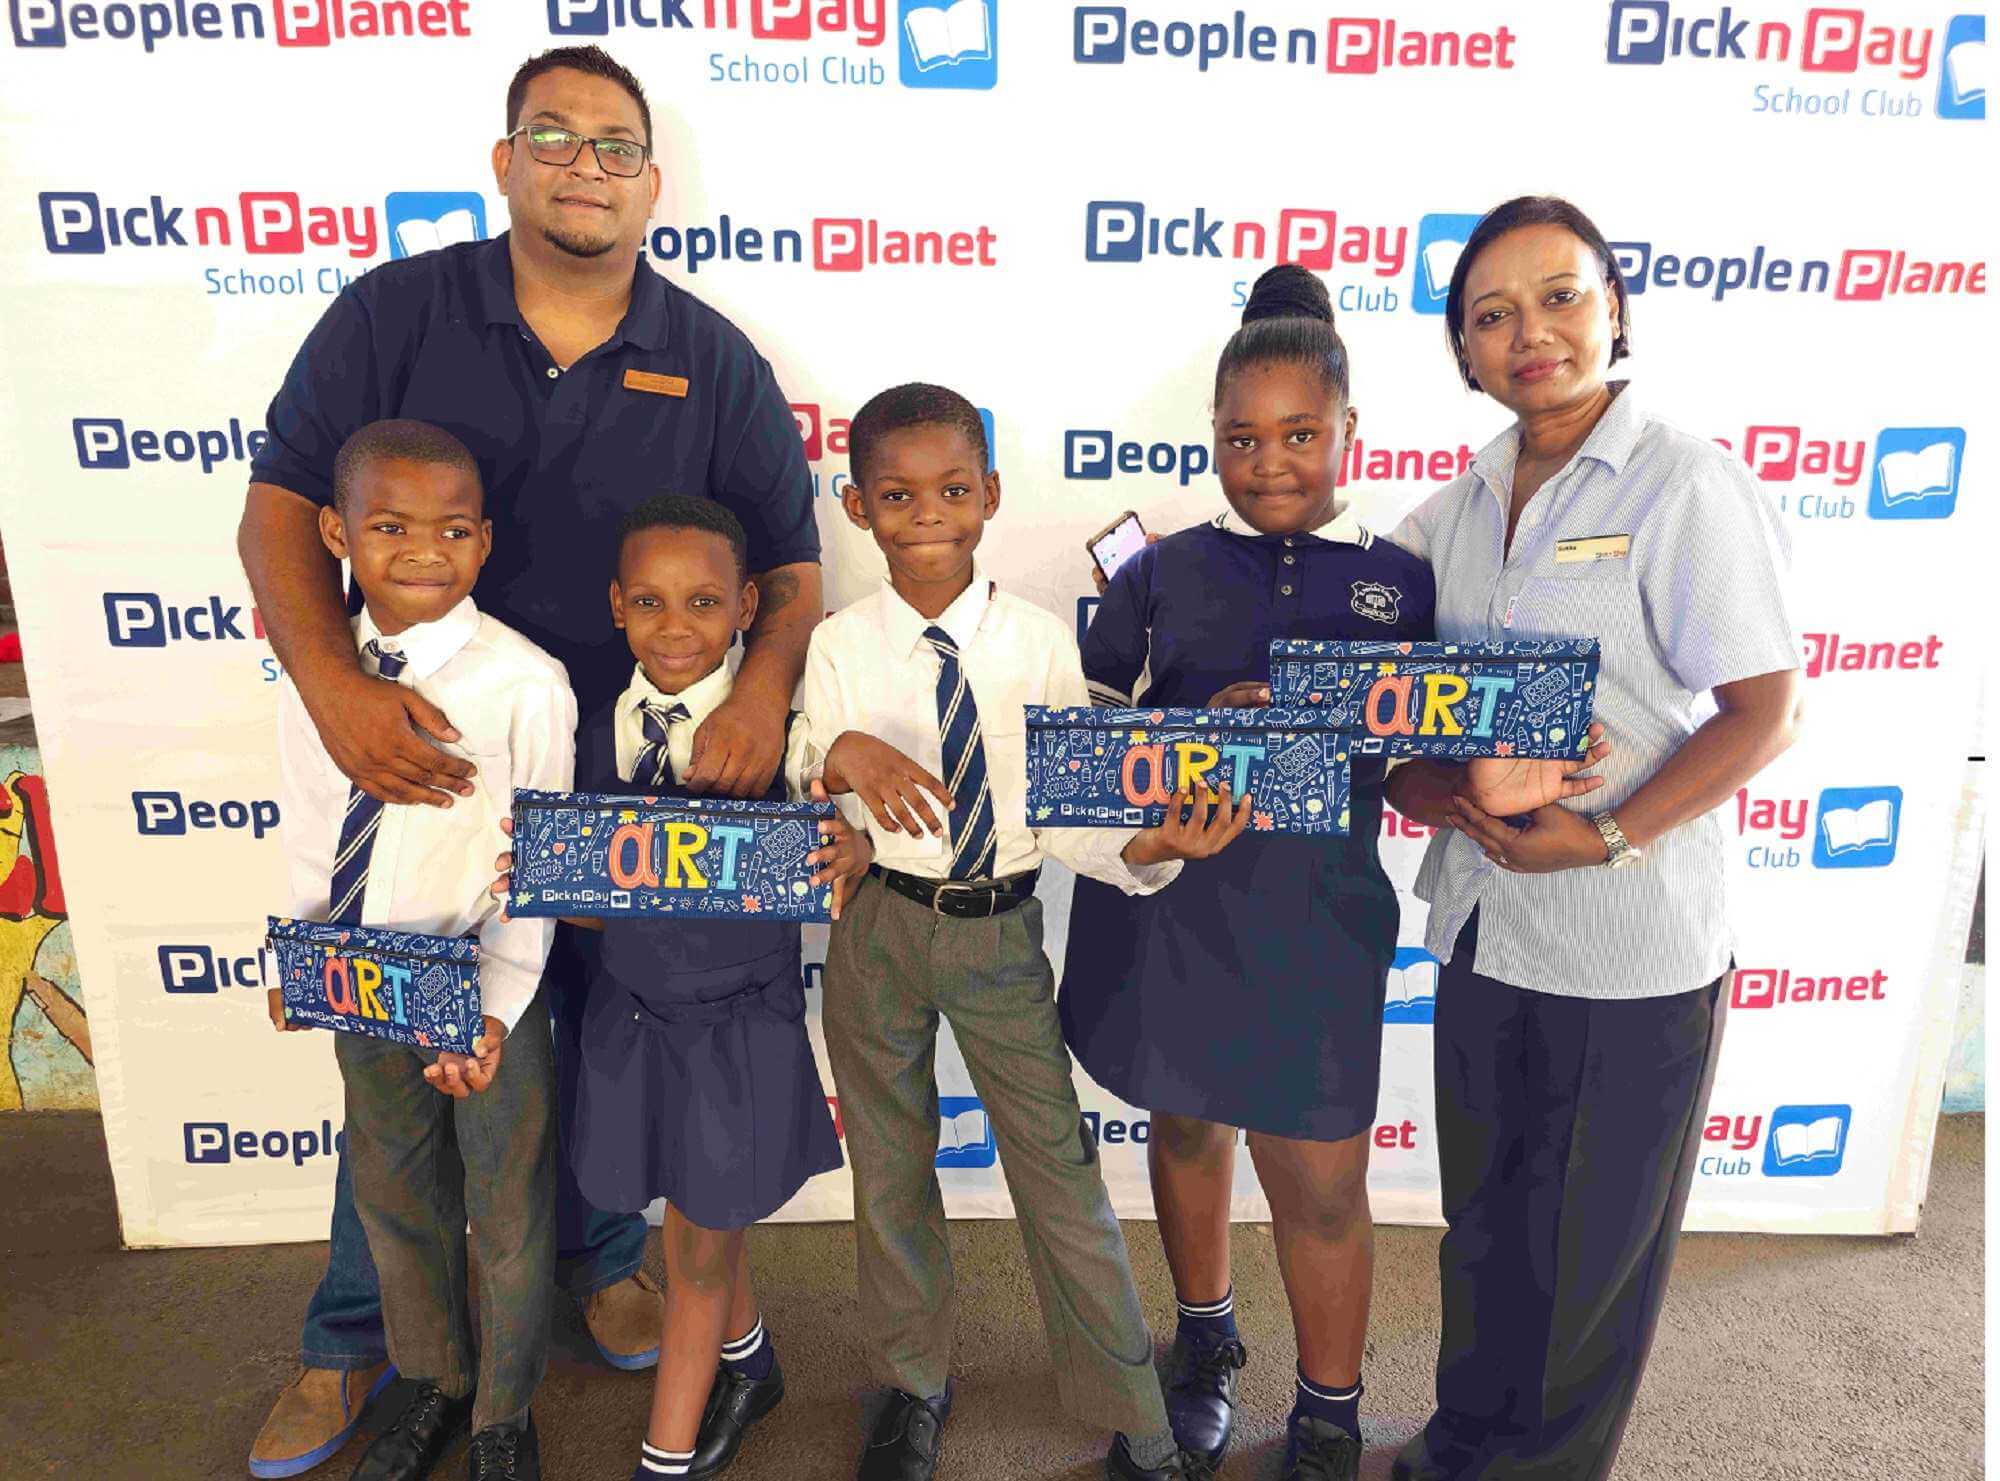 Pick n Pay Champions Recycling in Schools: Donates 35,000 Pencil Cases Made from Recycled Plastic to Educate Youth